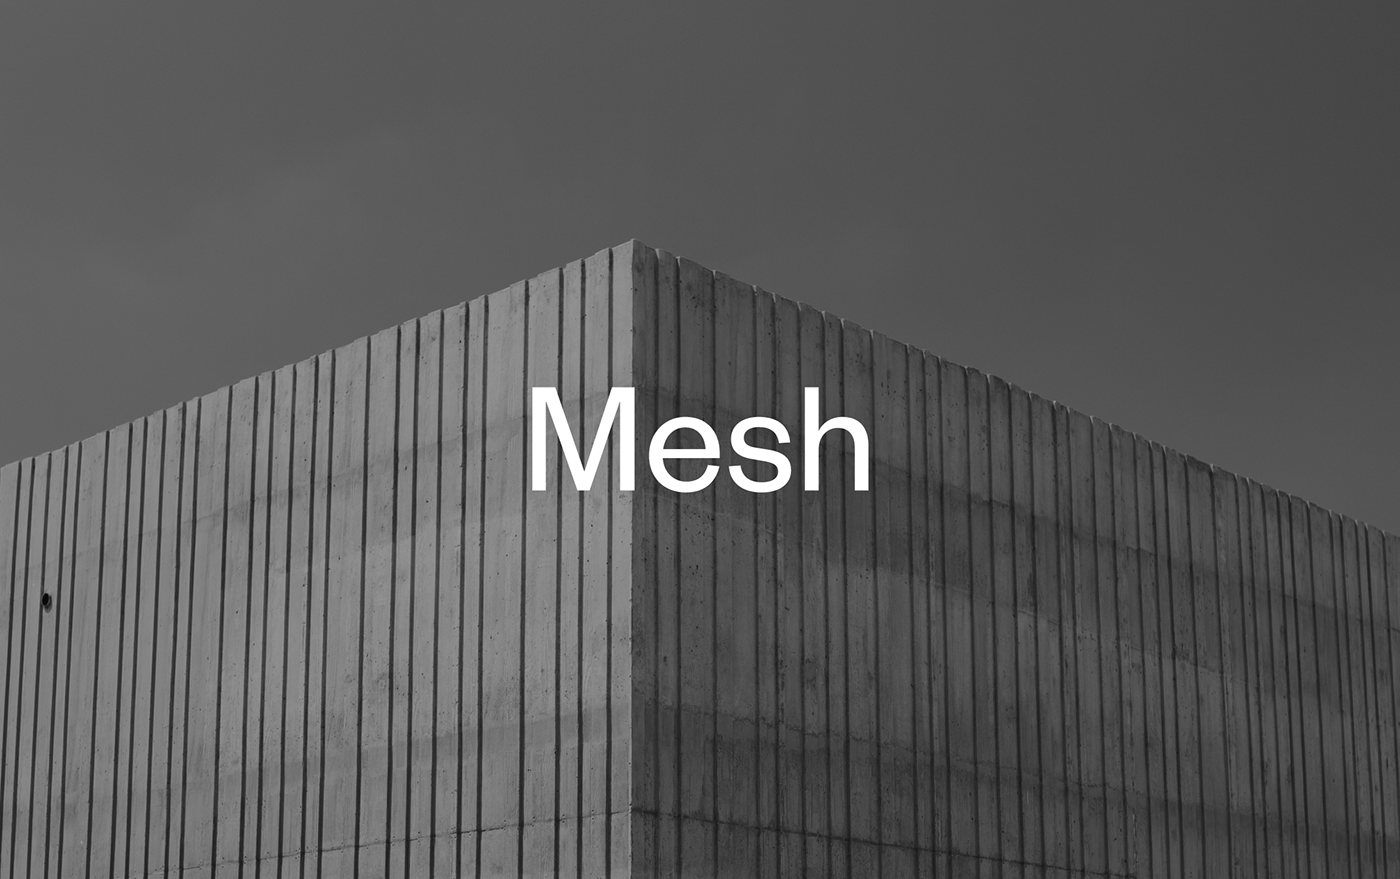 Cover image of Mesh logo and imagery